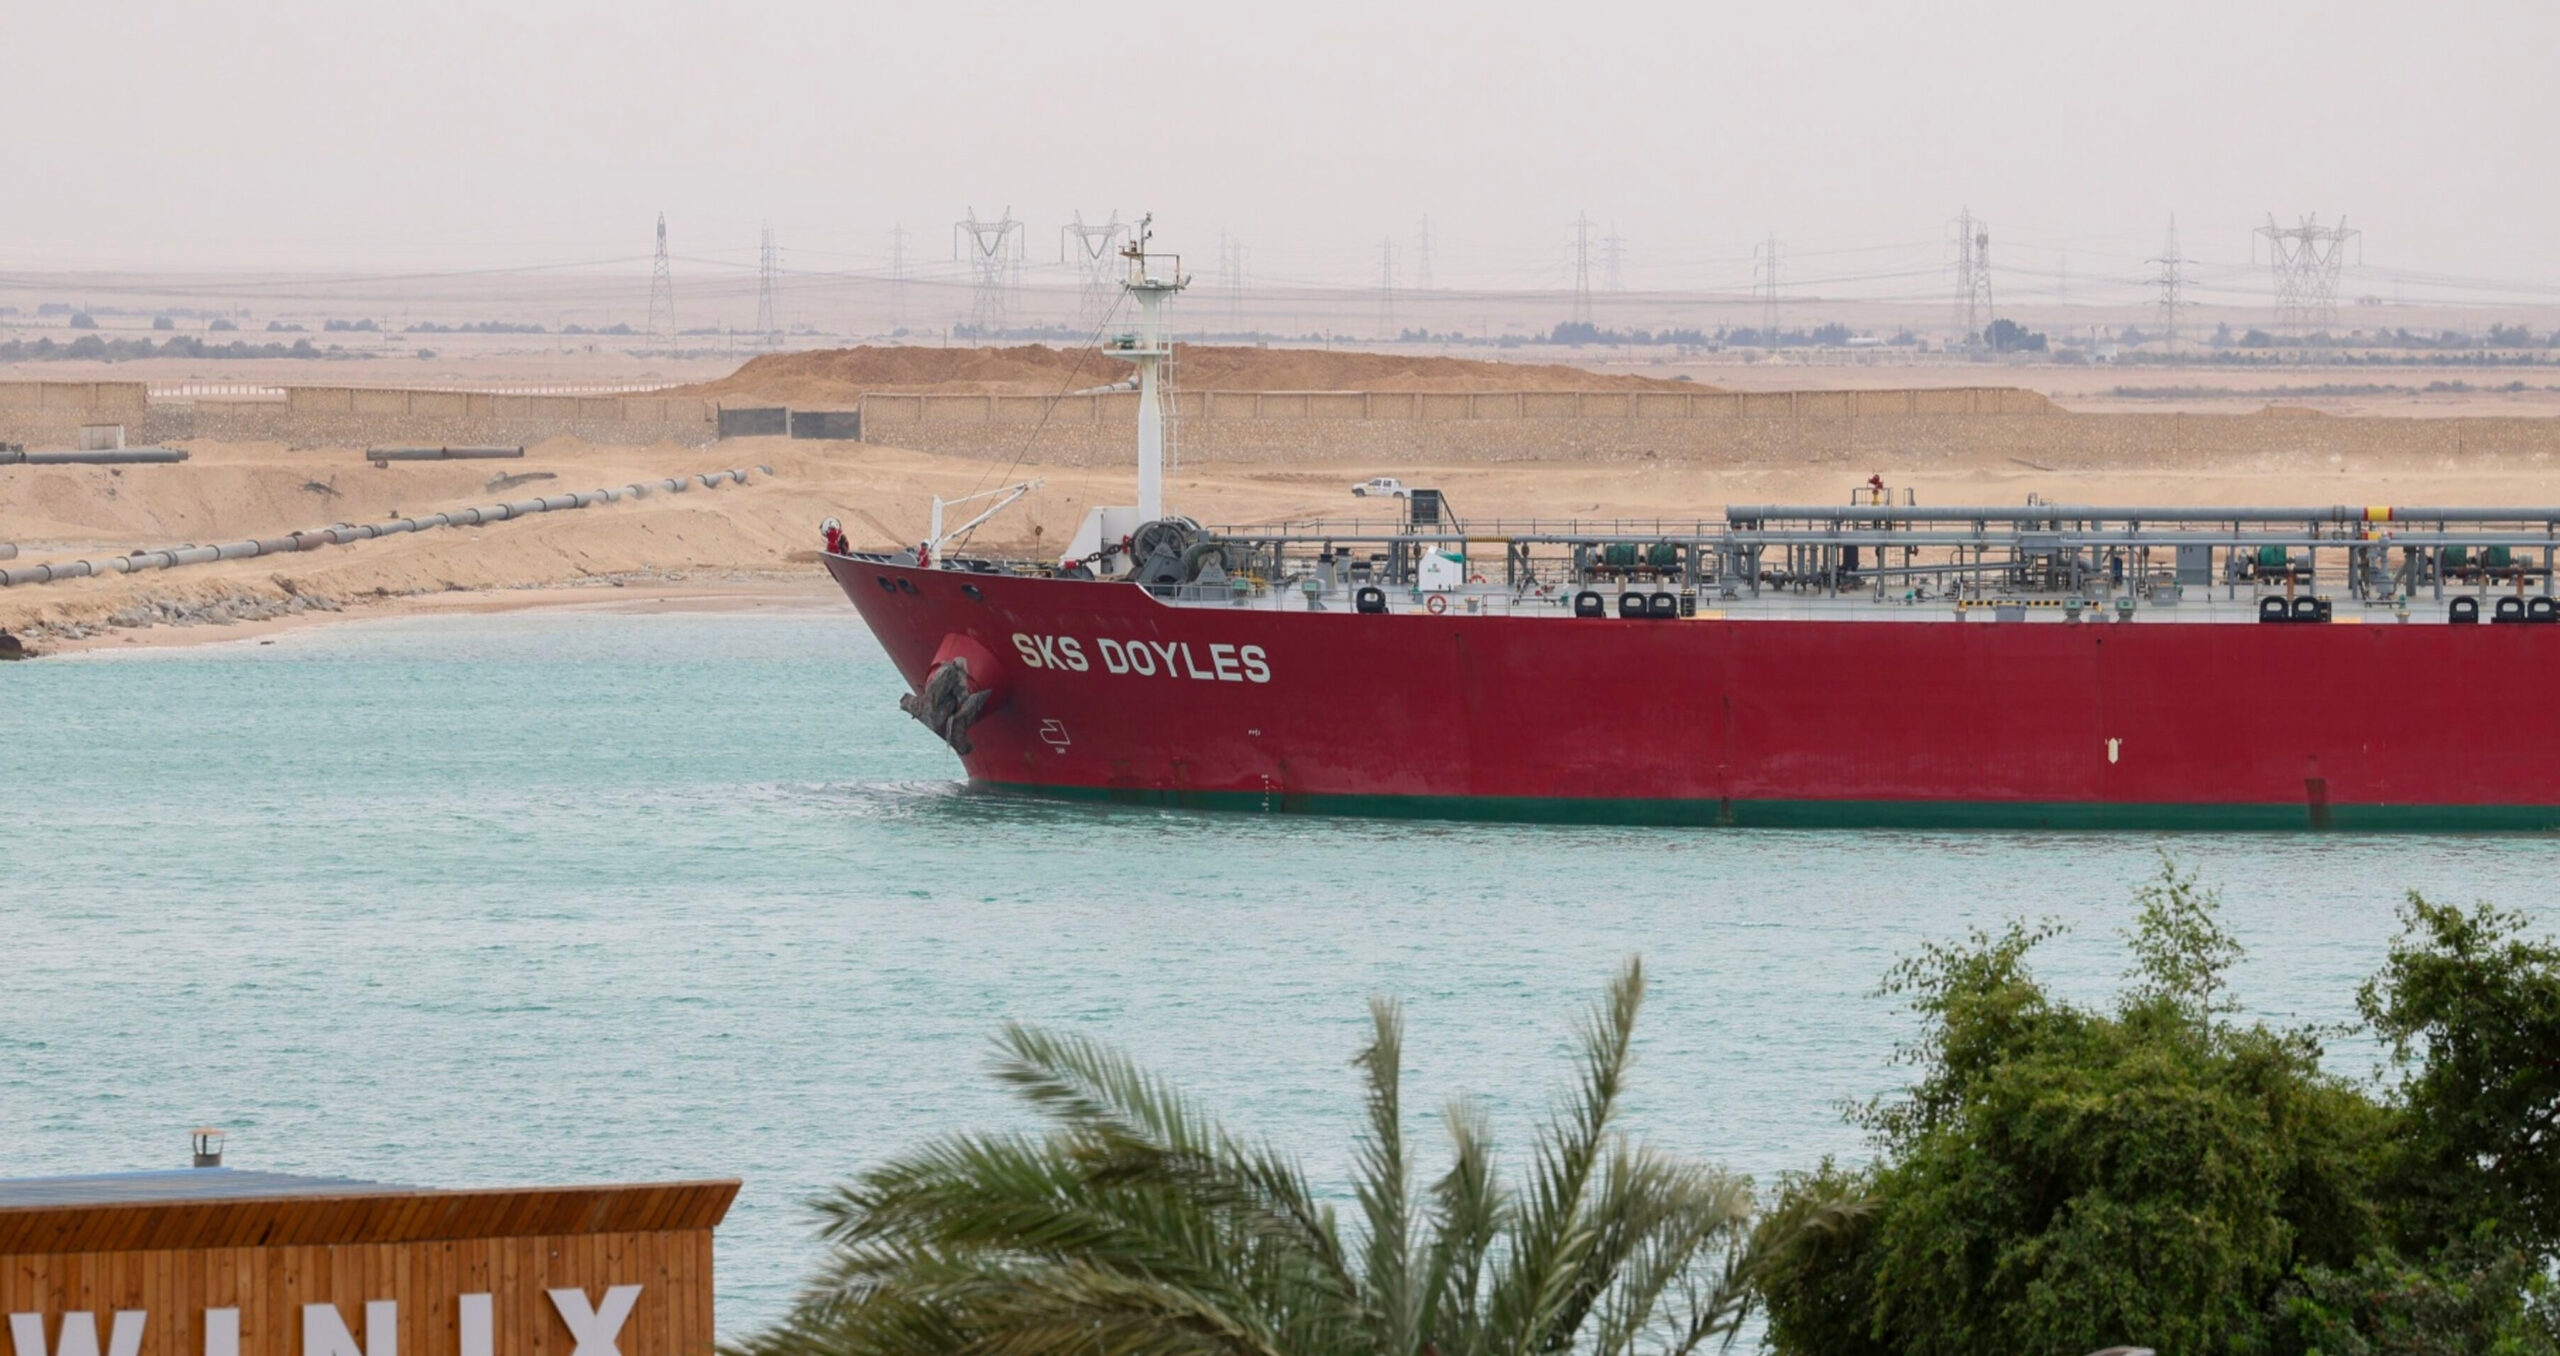 A crude oil tanker in the Suez Canal. Following recent attacks on vessels in the Gulf of Aden, Unctad estimates that transits through the canal are down by more than 40 per cent compared to their peak (Photo: Stringer/Bloomberg) 